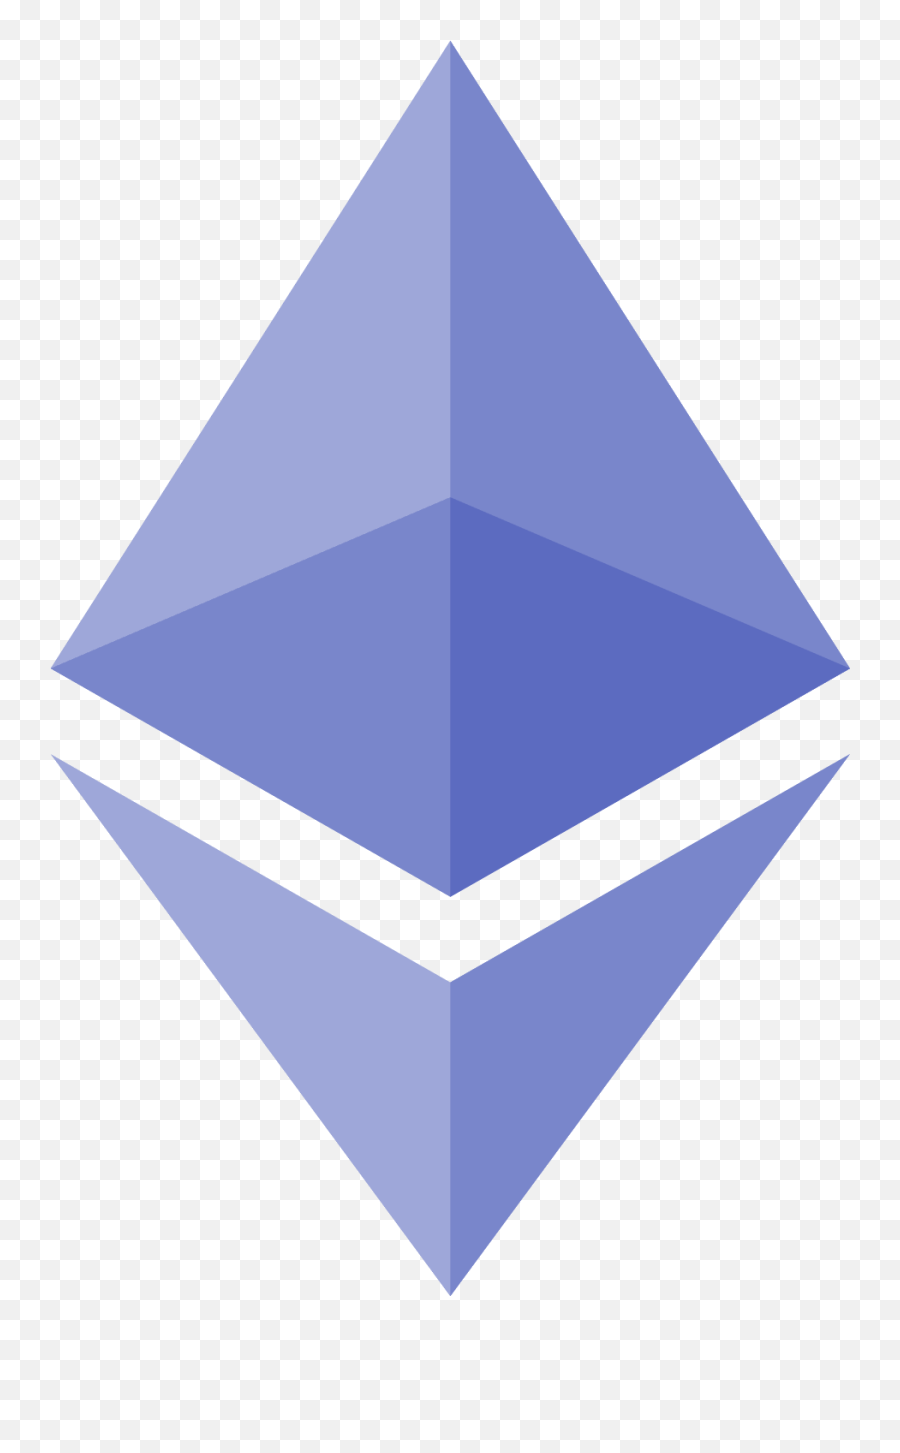 Ethereum Logo Png 9 Image - Ethereum Logo,Ethereum Logo Png